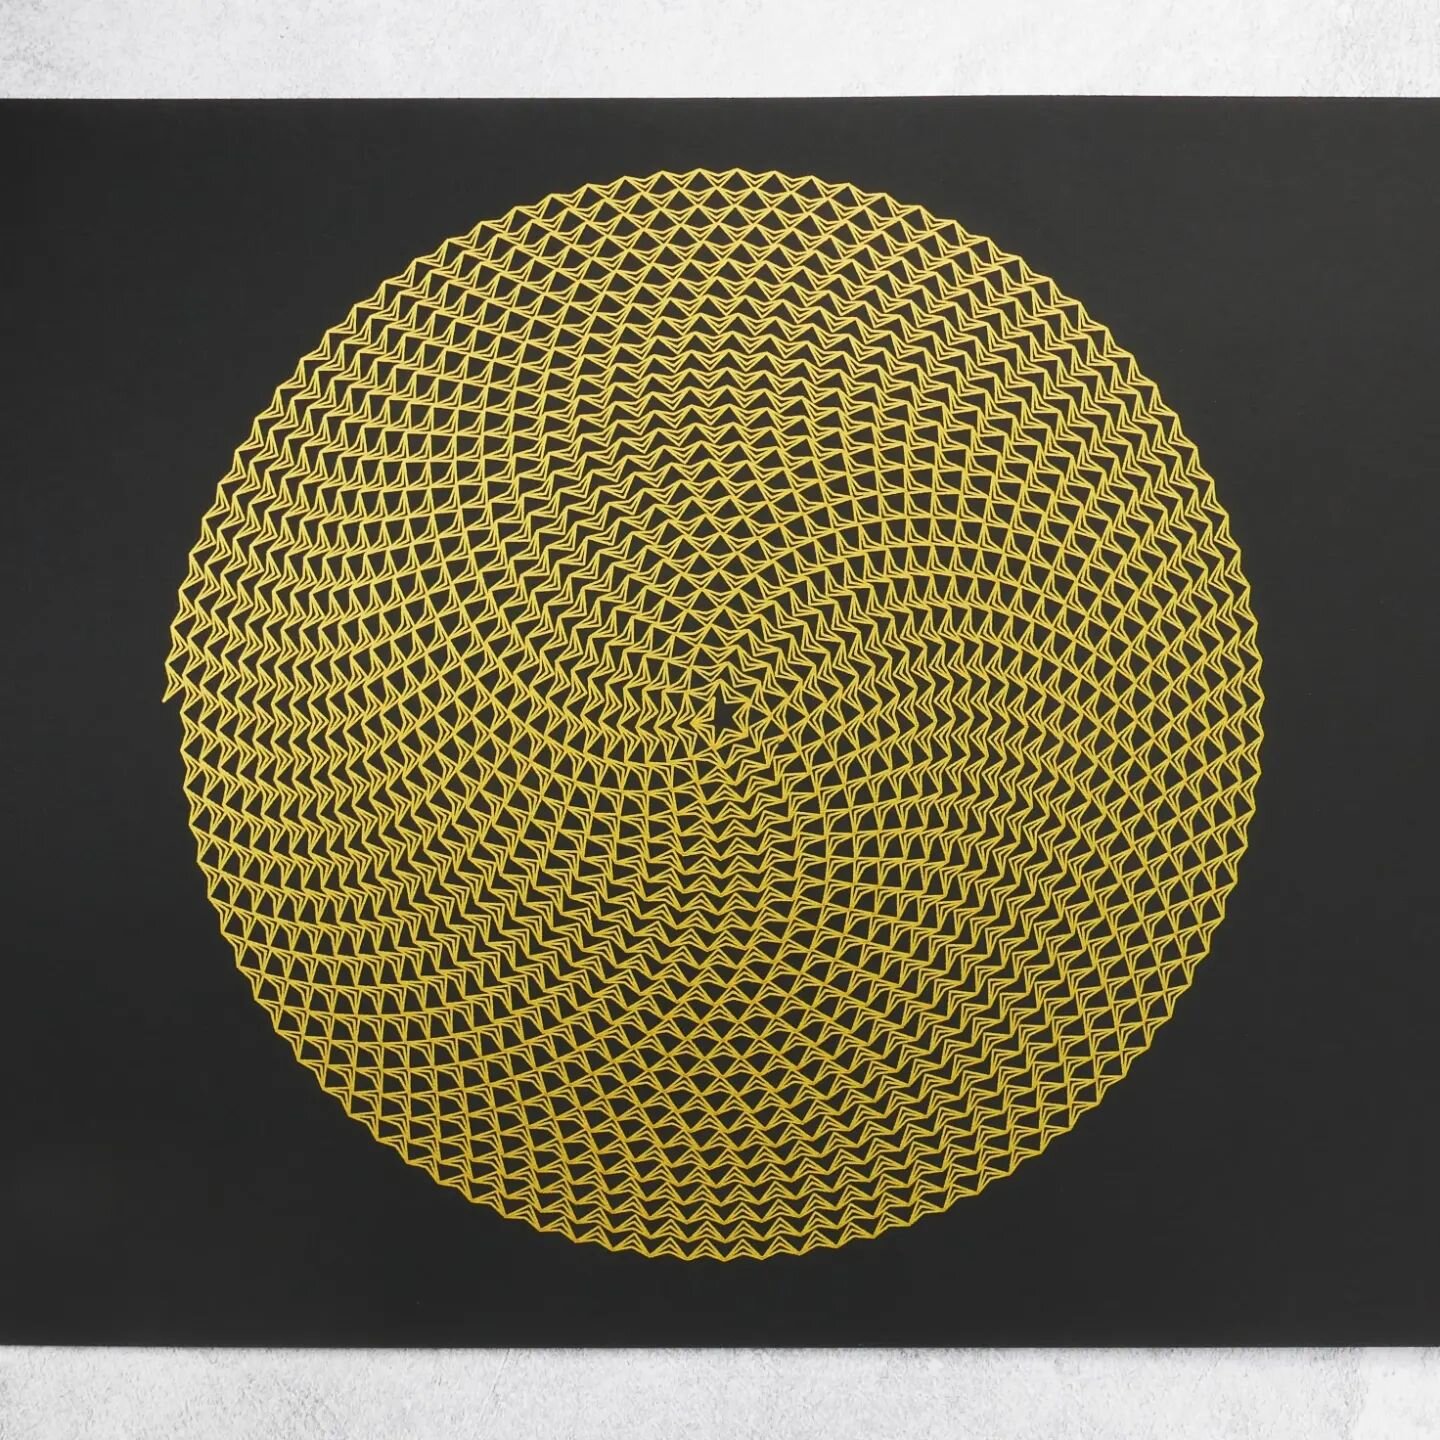 Final in the Vortex series for now.
A more geometrical and angular aesthetic, a spiralling triangular tessellation.

Each curve is drawn twice to maximise the shining golden colour. 

.
420 x 297mm
Gold on Black
Signo UM-153 on Fabriano Black Black 3